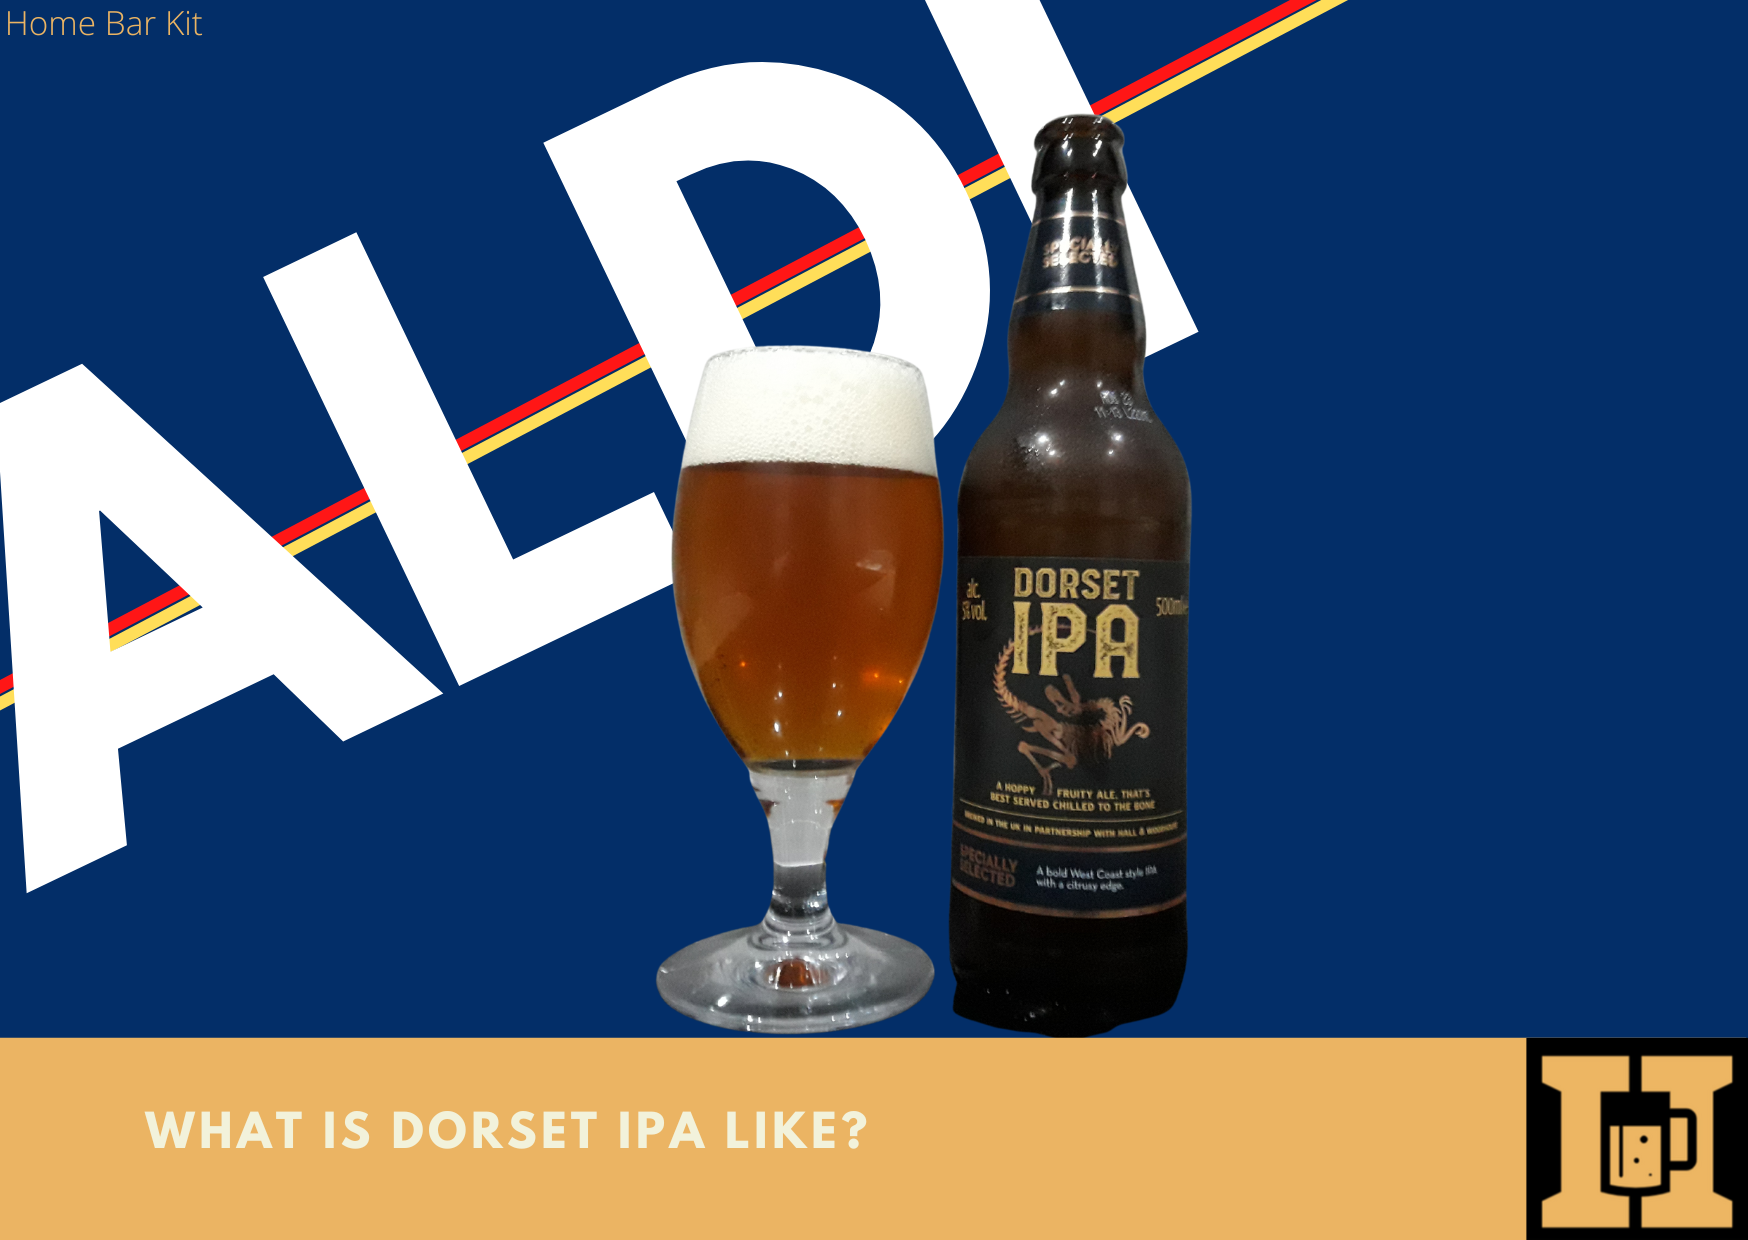 What Is Dorset IPA From Badger Like